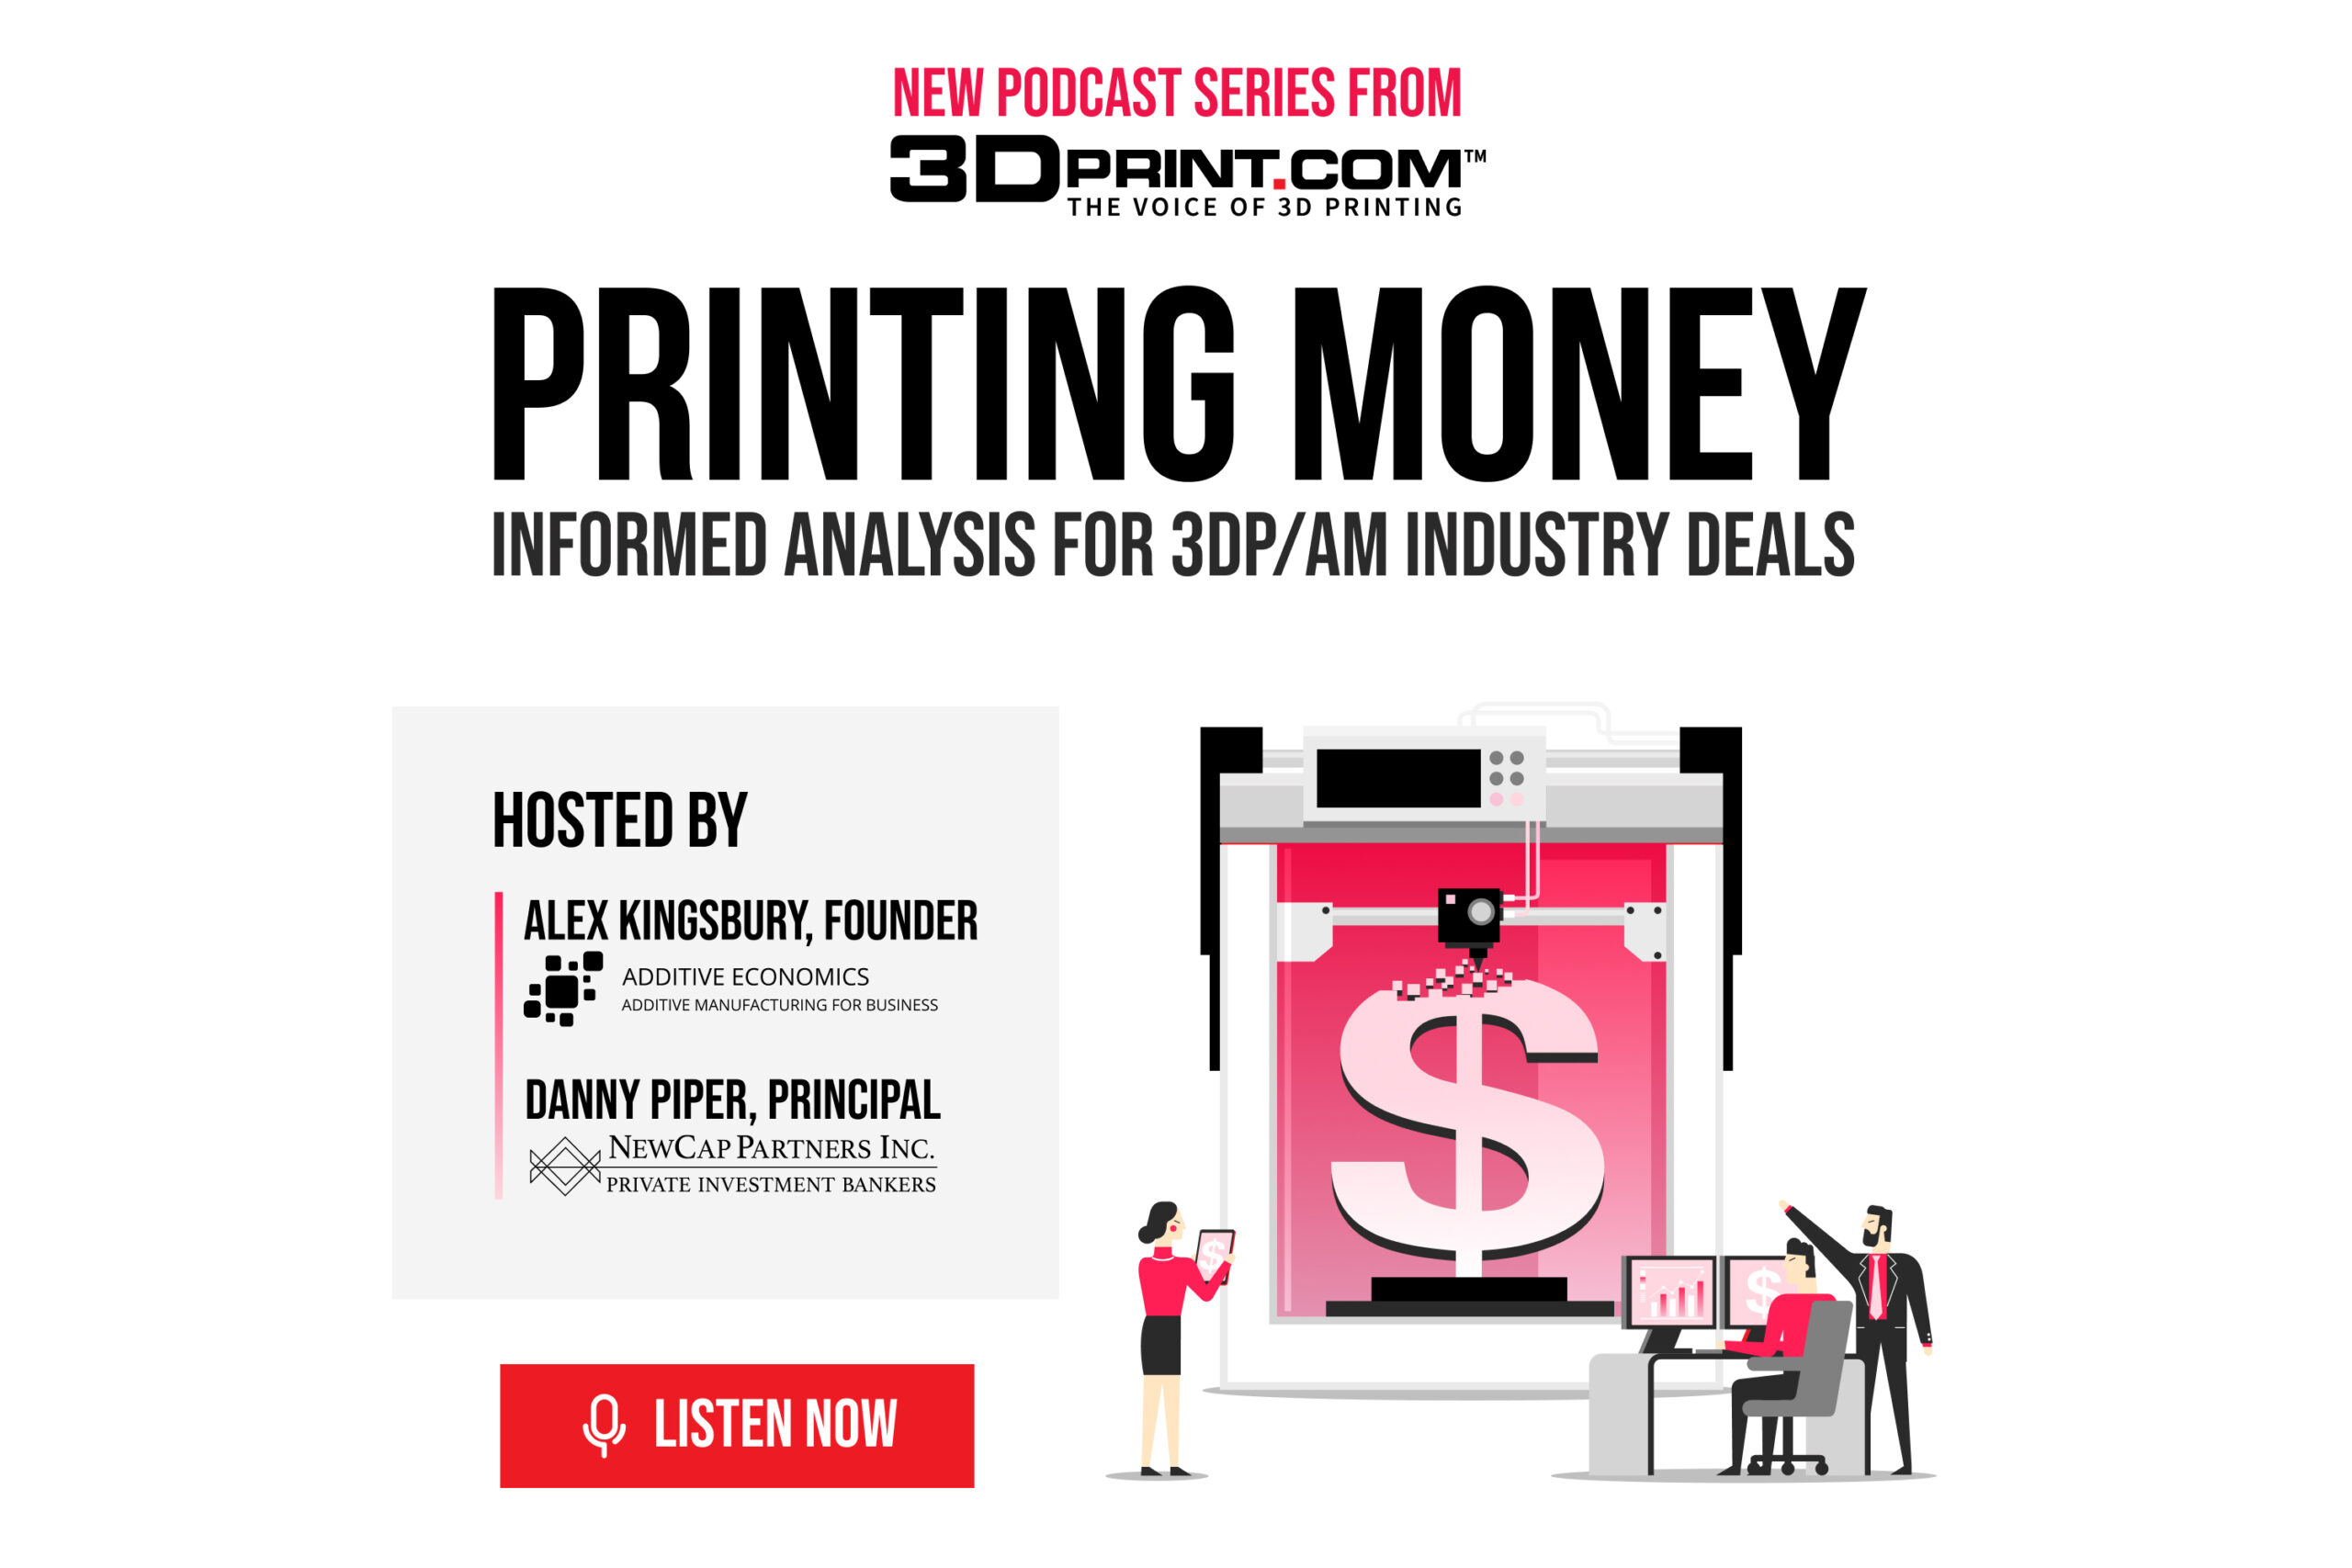 Printing Money Emergency Broadcast: Stratasys and Desktop Metal to Merge in All-stock Deal